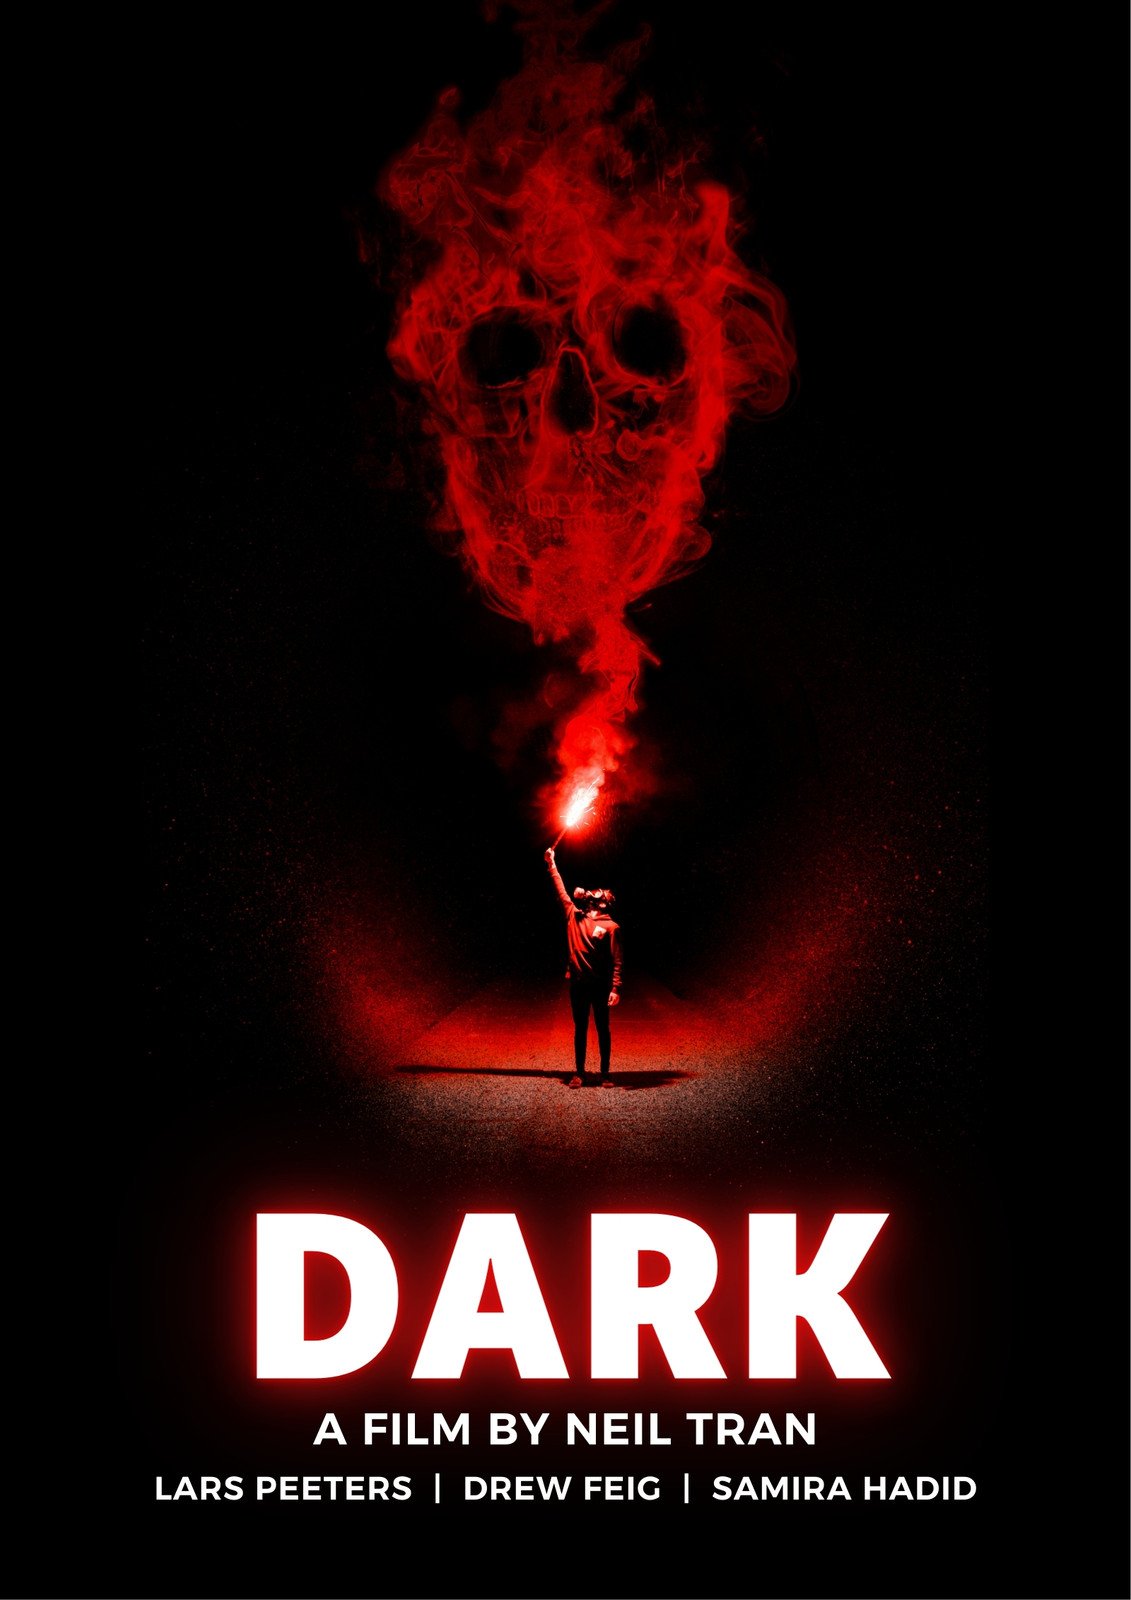 Red And Black Horror Movie Poster